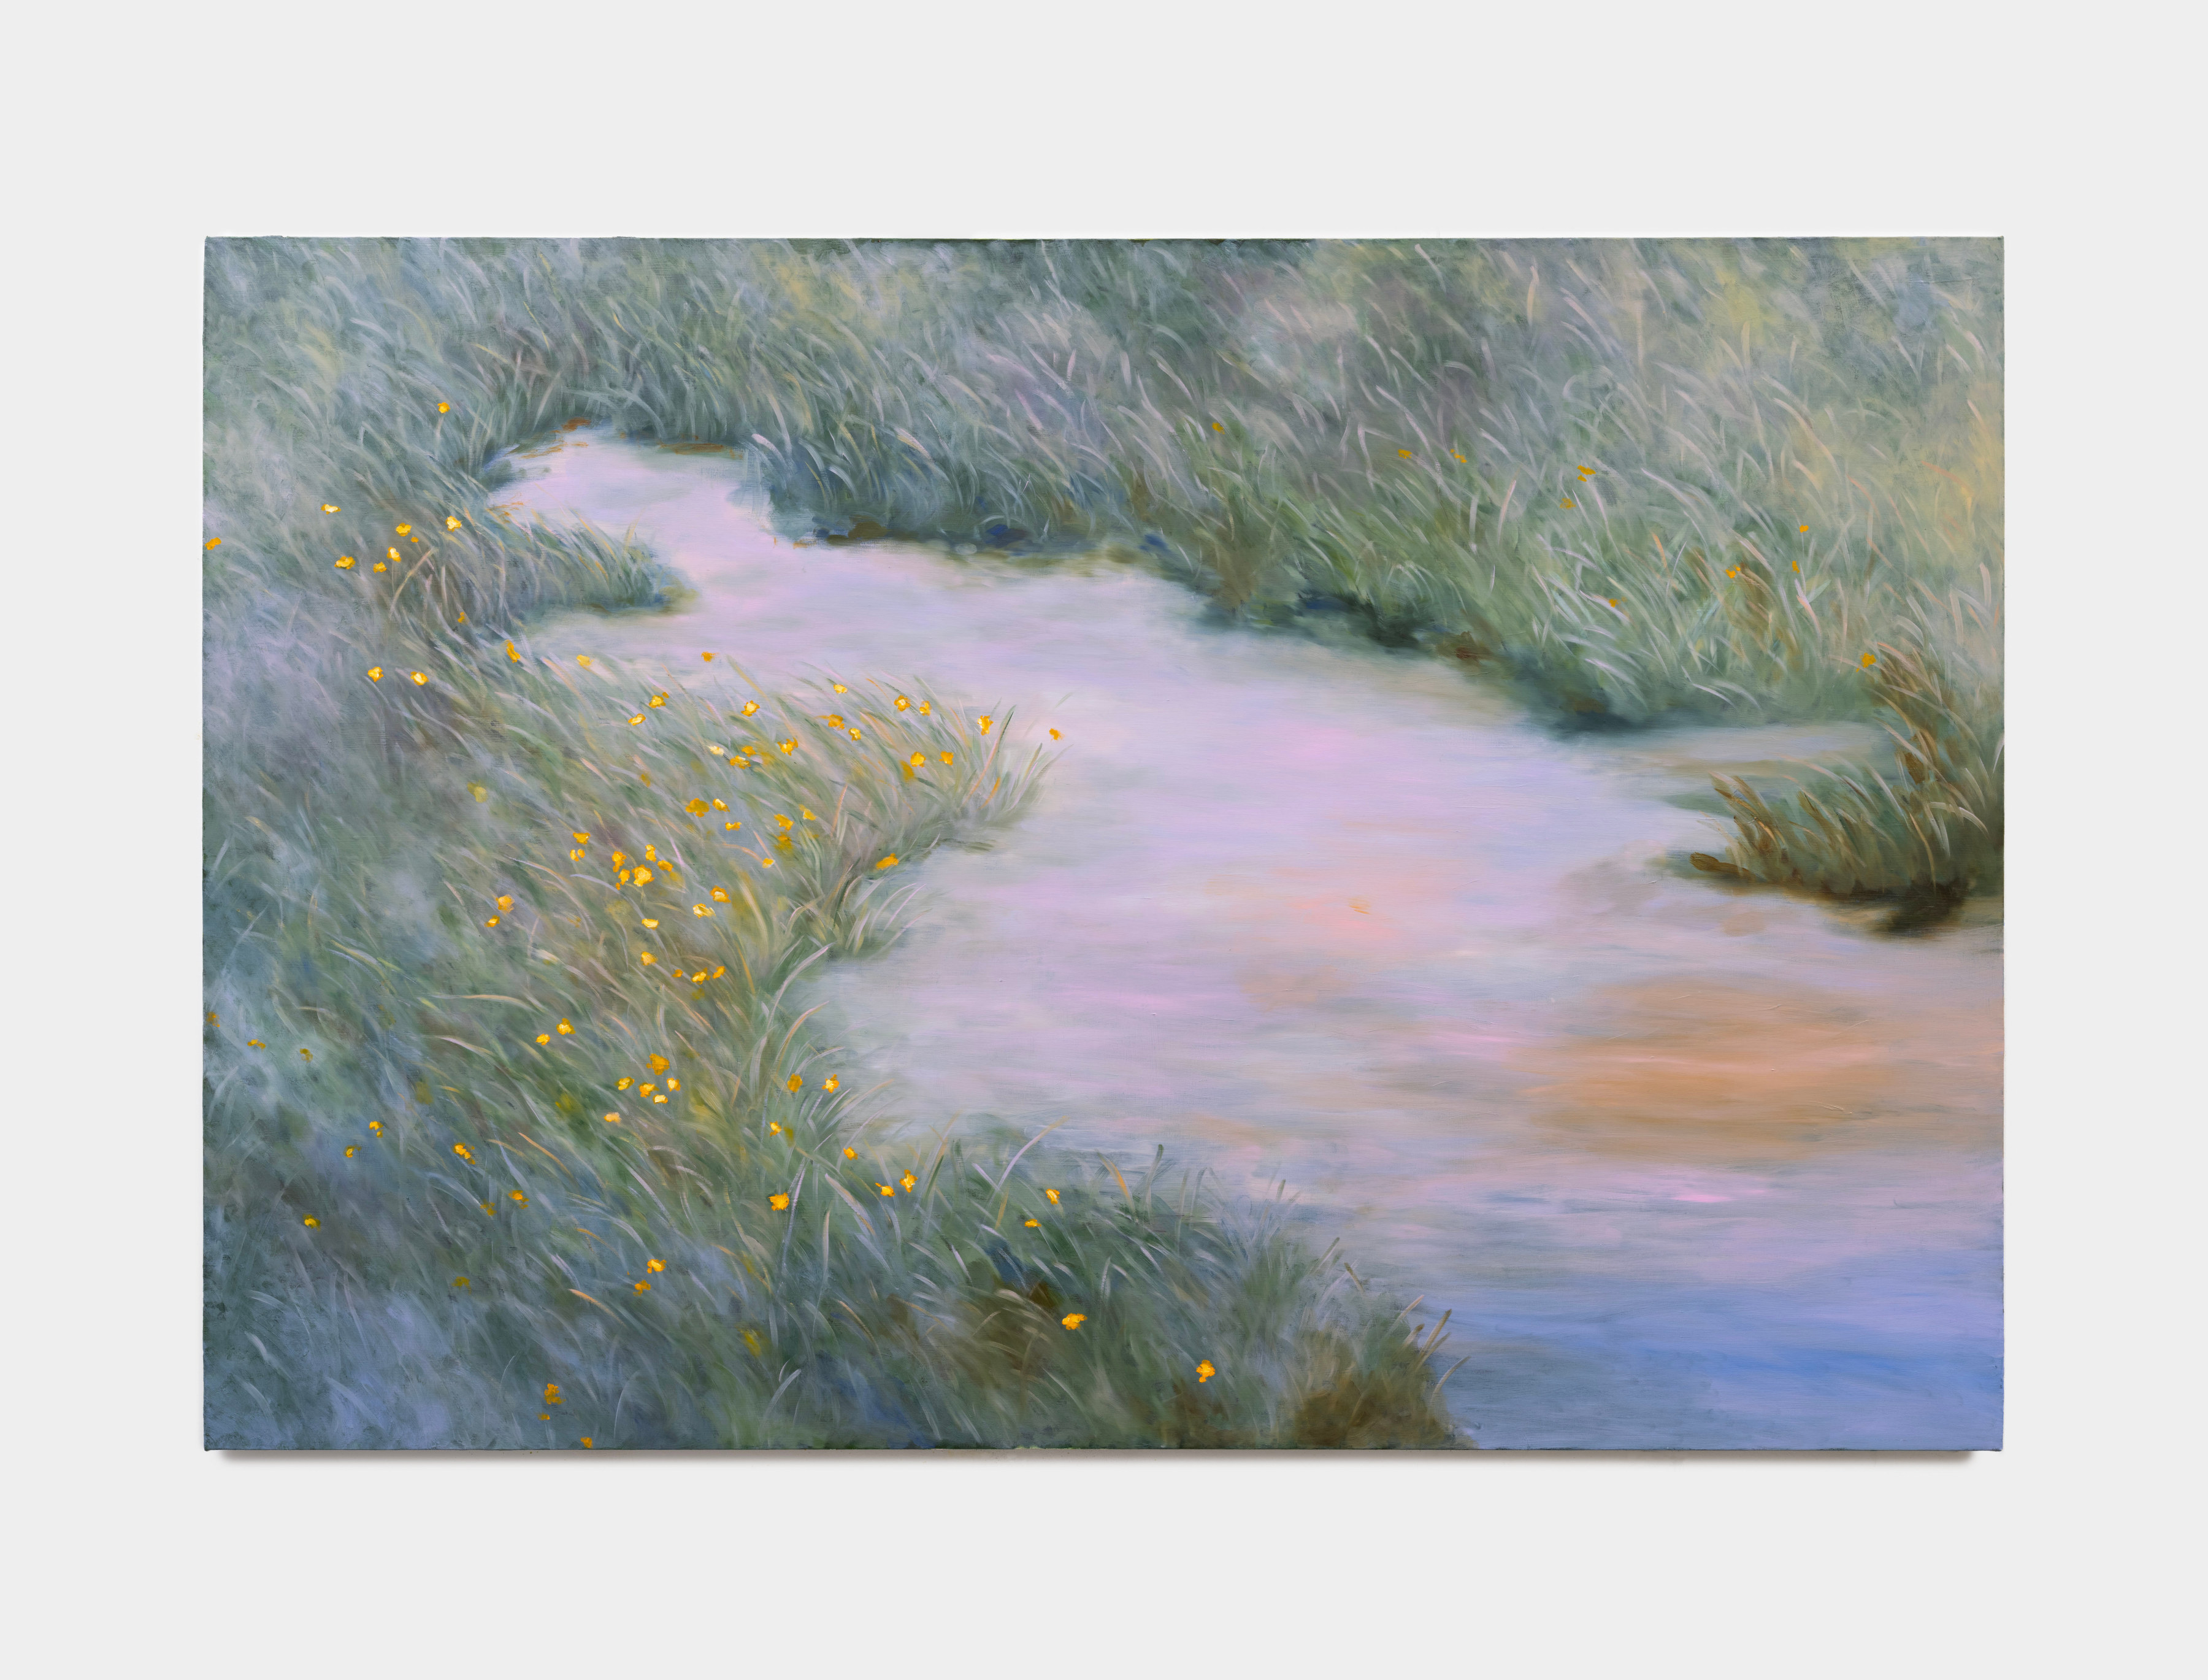 A painting of pale purple waters surrounded by green grass and yellow flowers. 